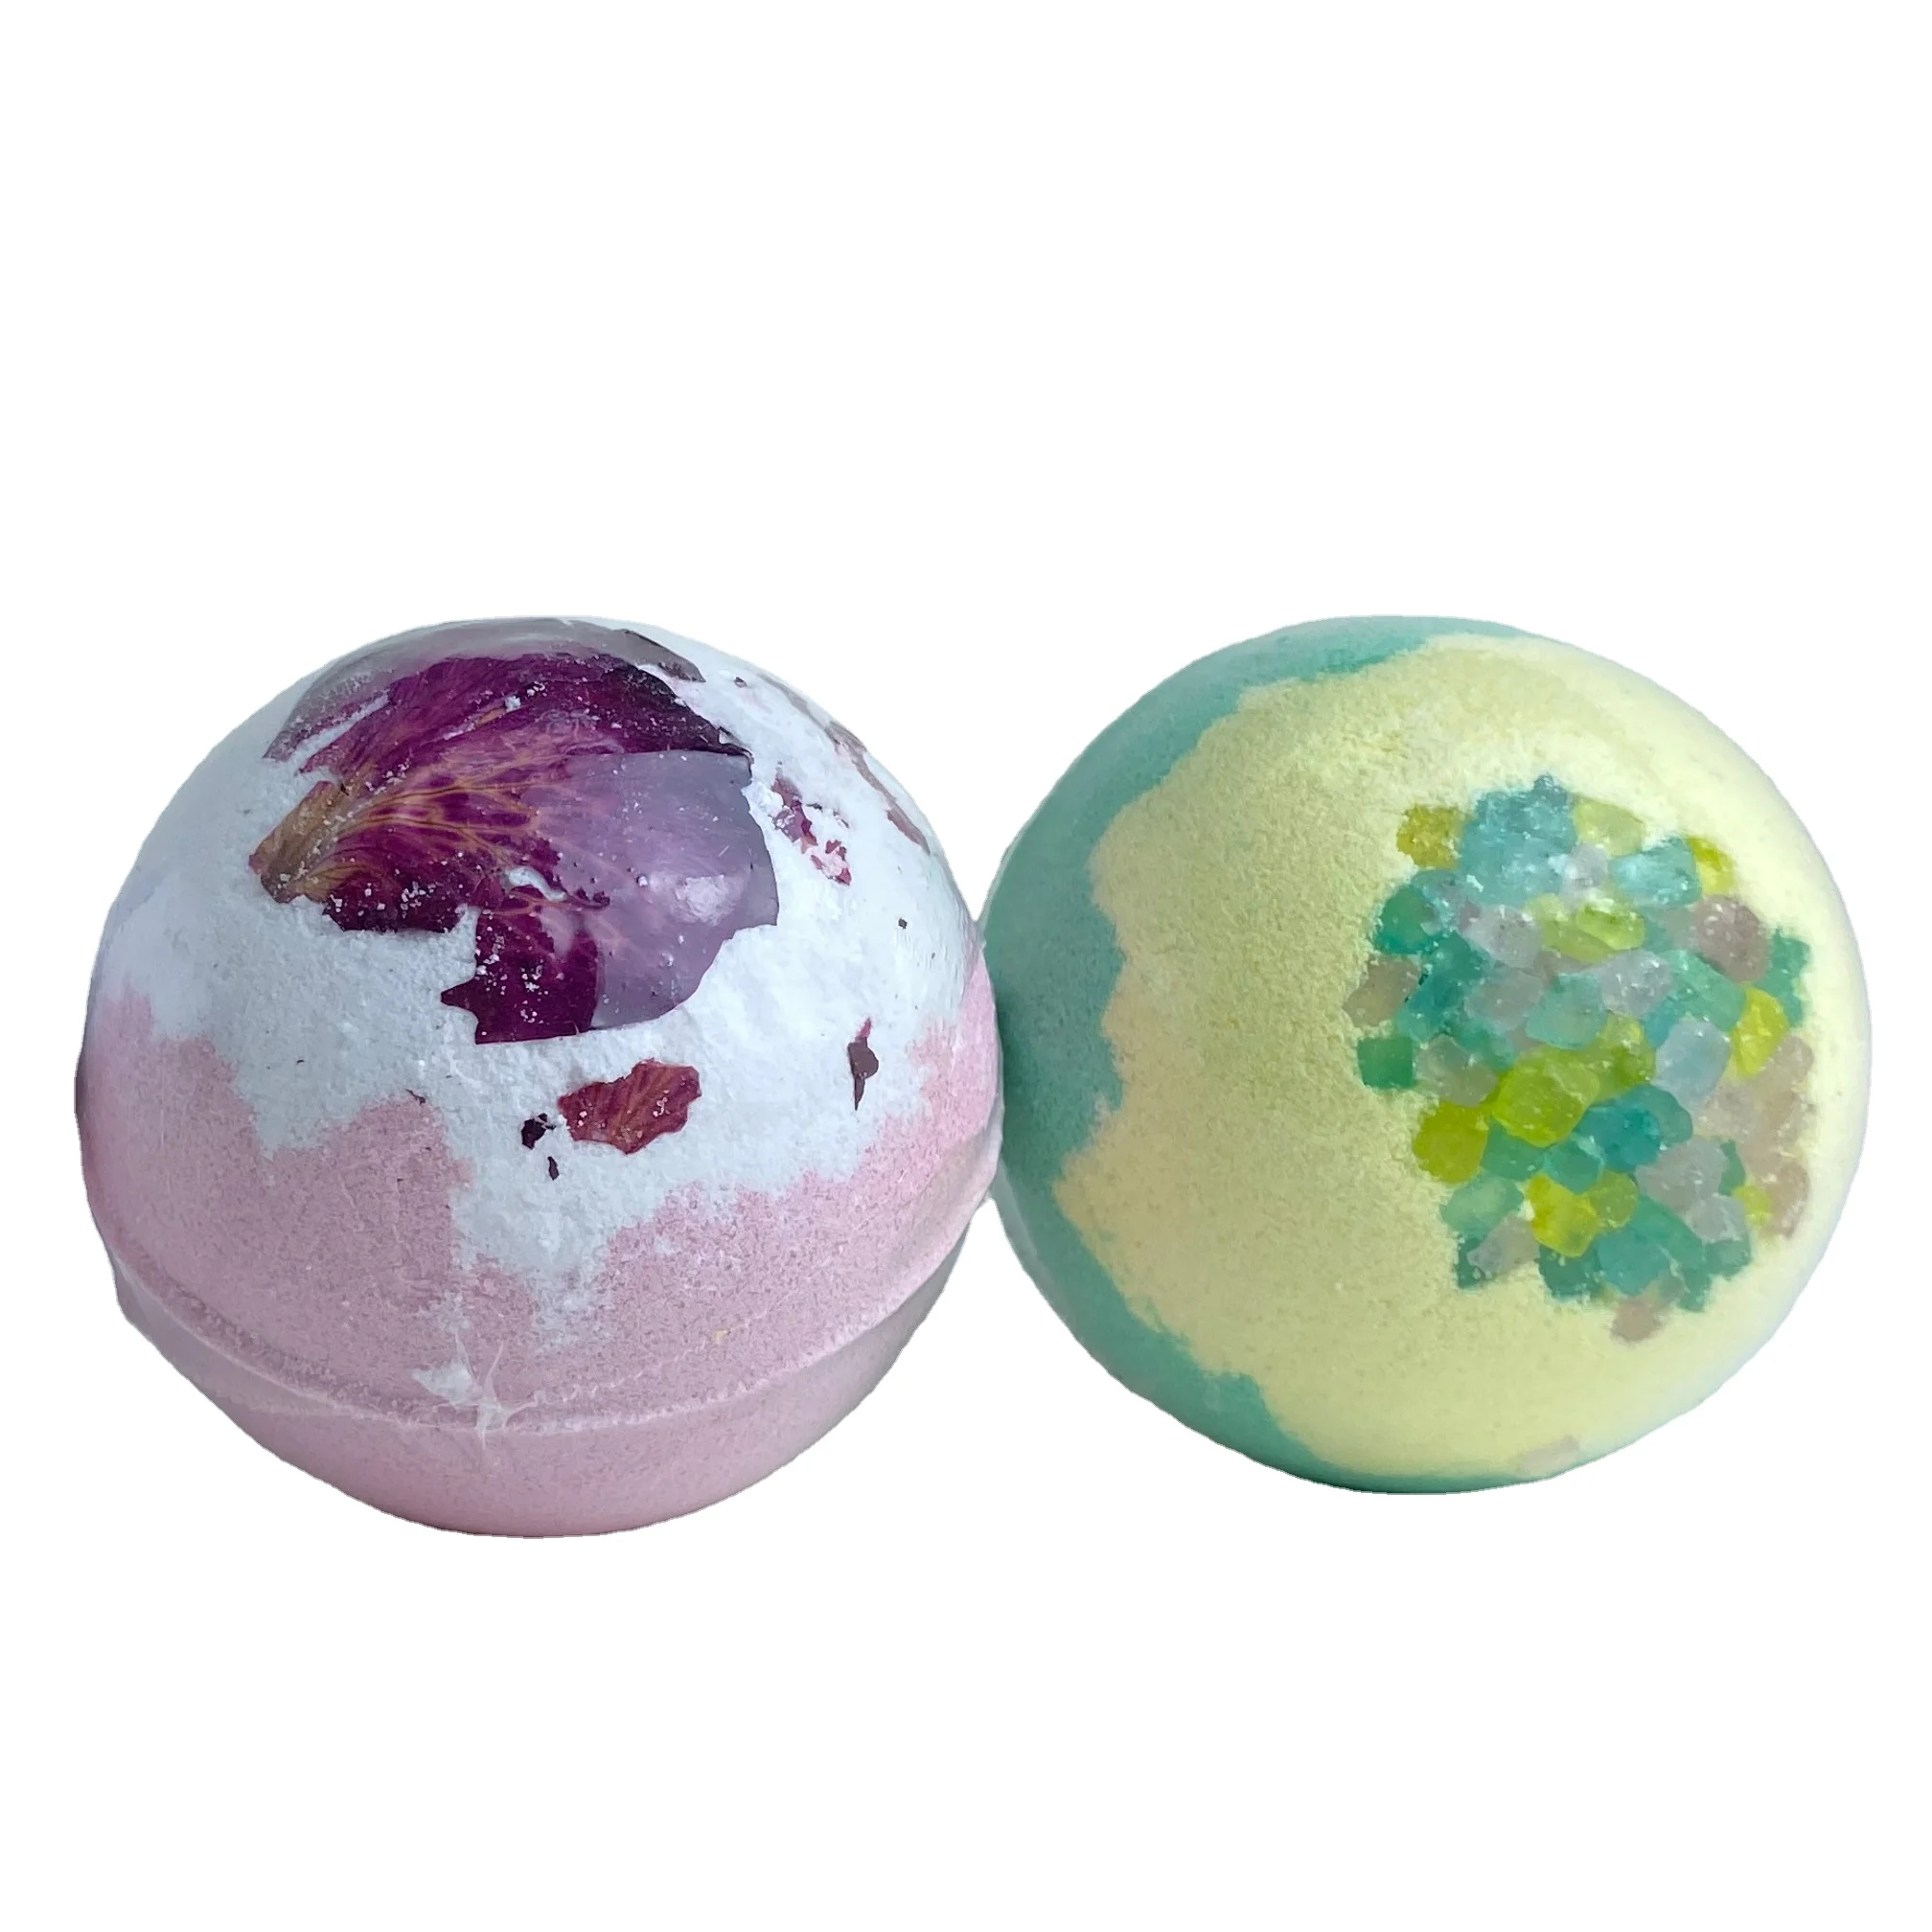 

Hot Selling Gift Set Private Label Natural bath bomb set Vegan Organic Fizzy hemp Christmas crystal Bath Bombs For Kids, Customized color